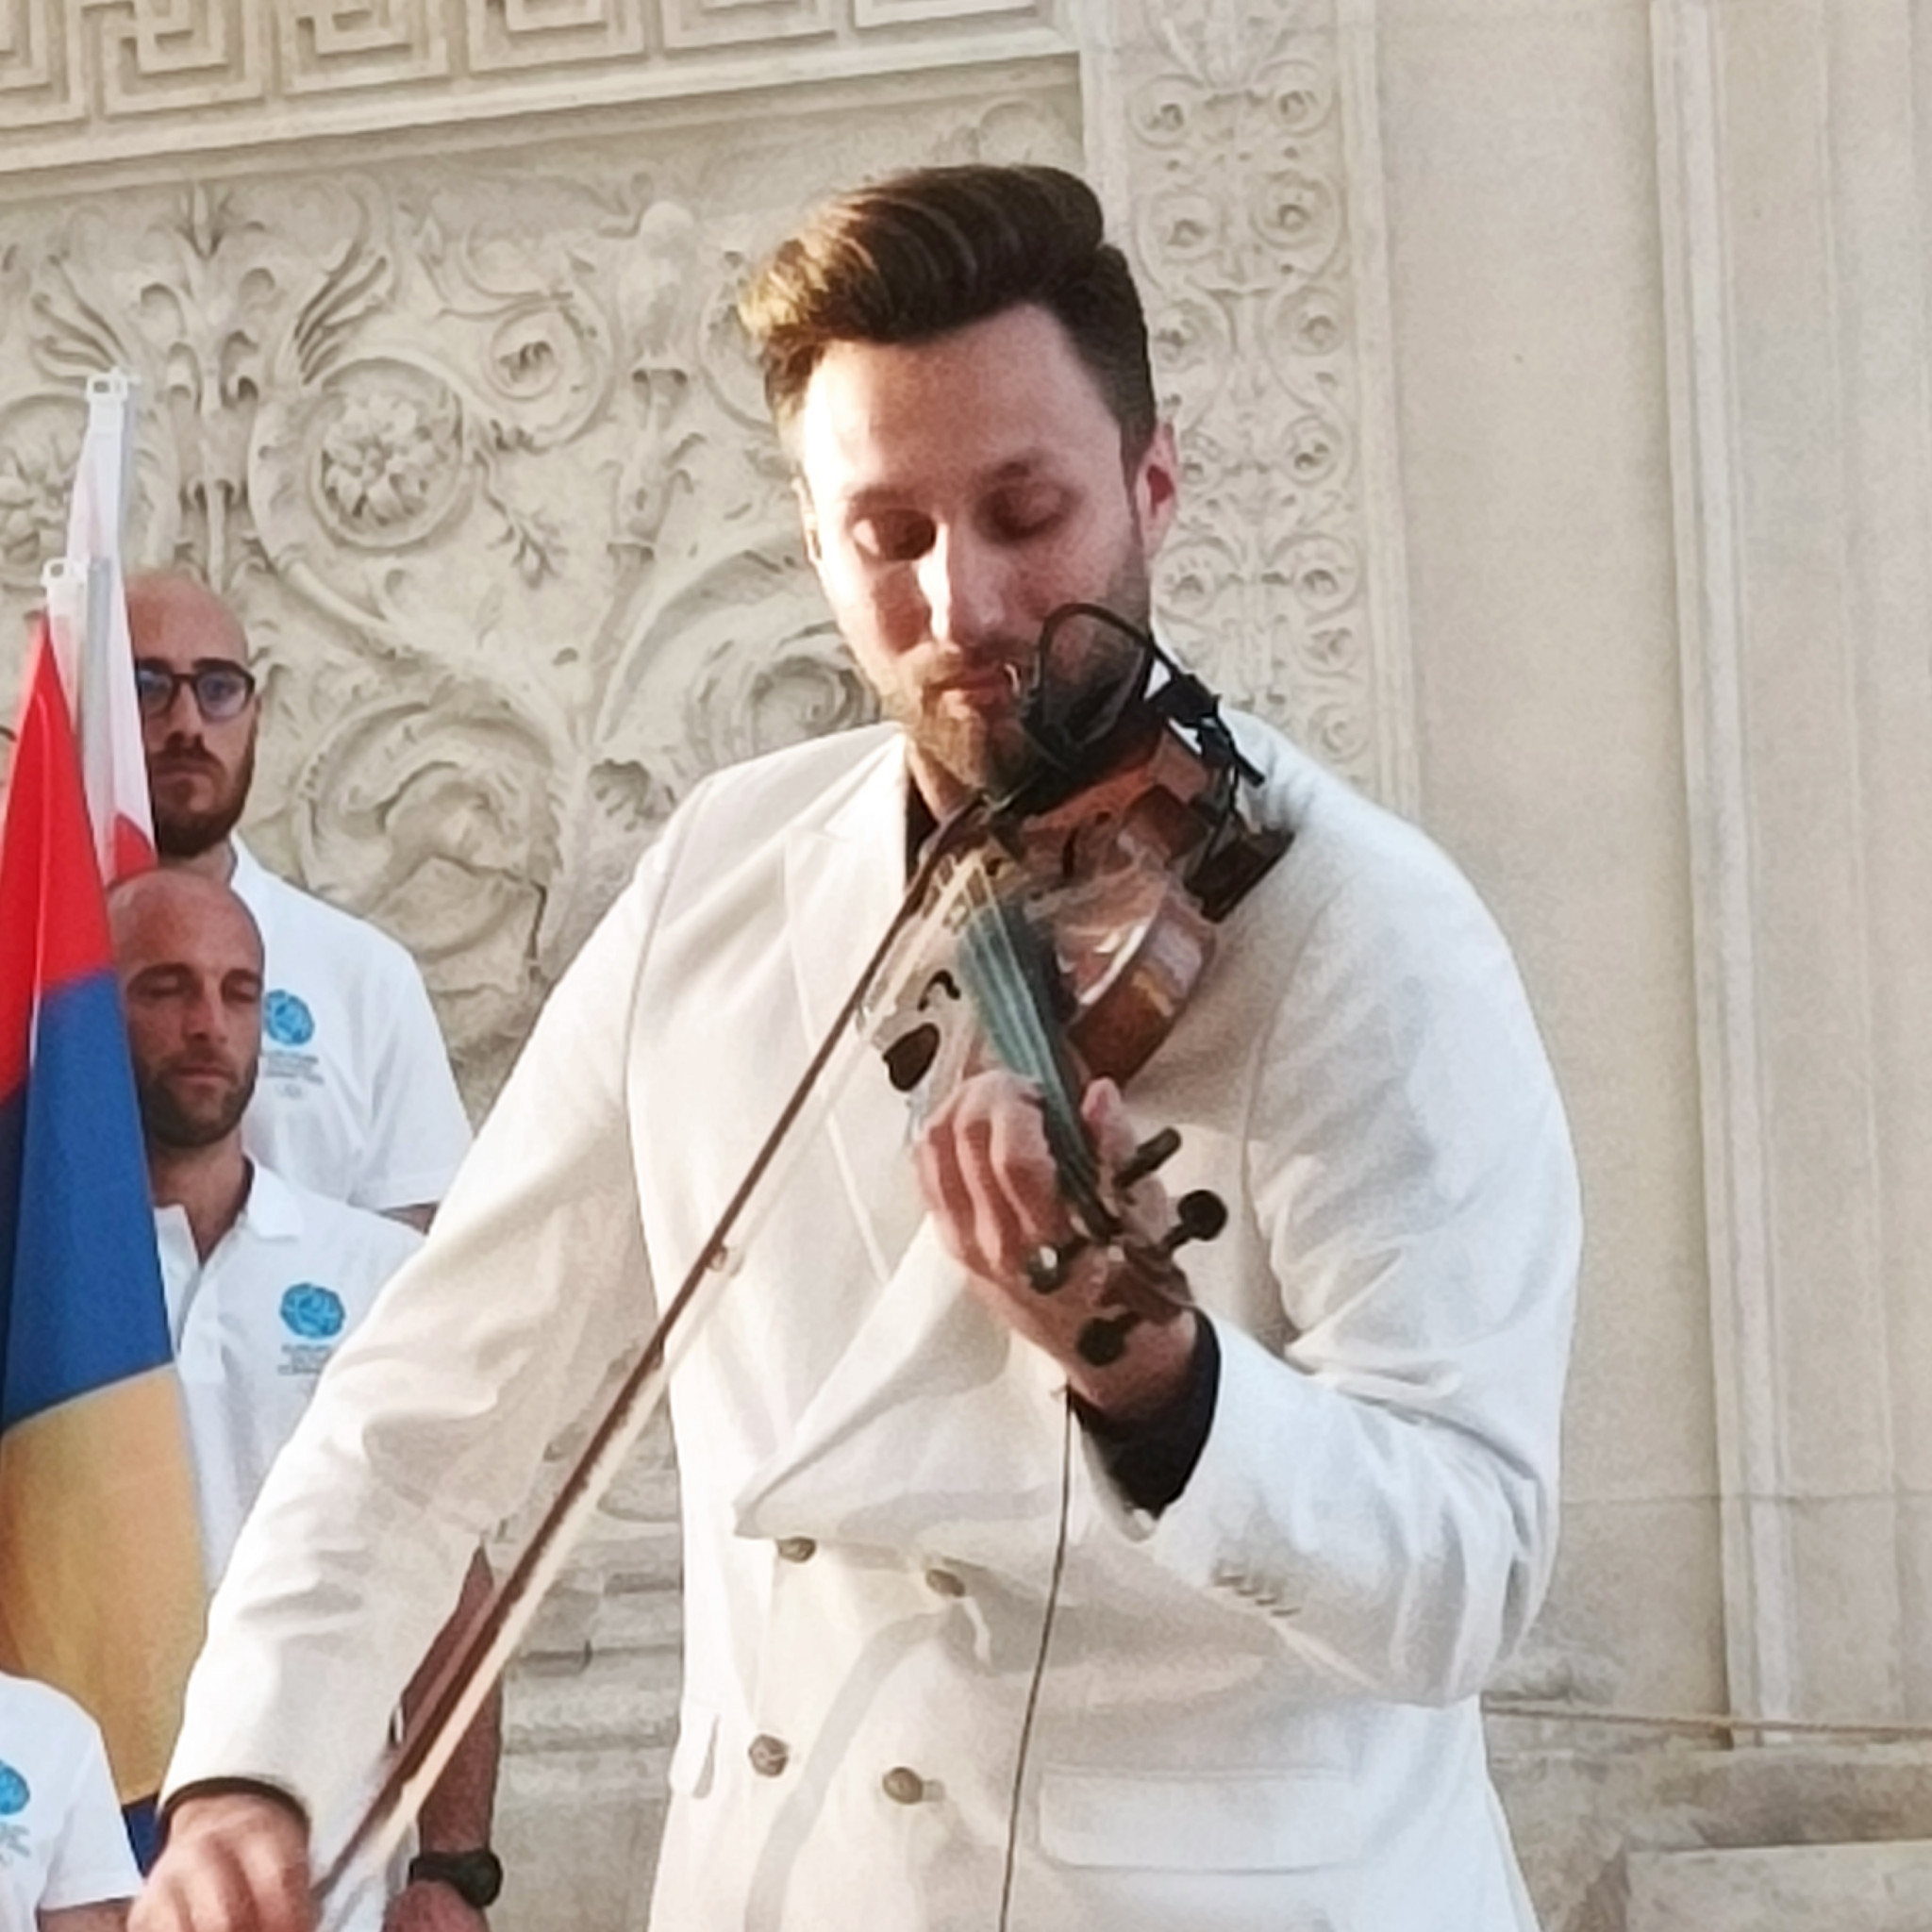 Violinist Valentino Alessandrini performed during the musical finale to the ceremony ©ITG